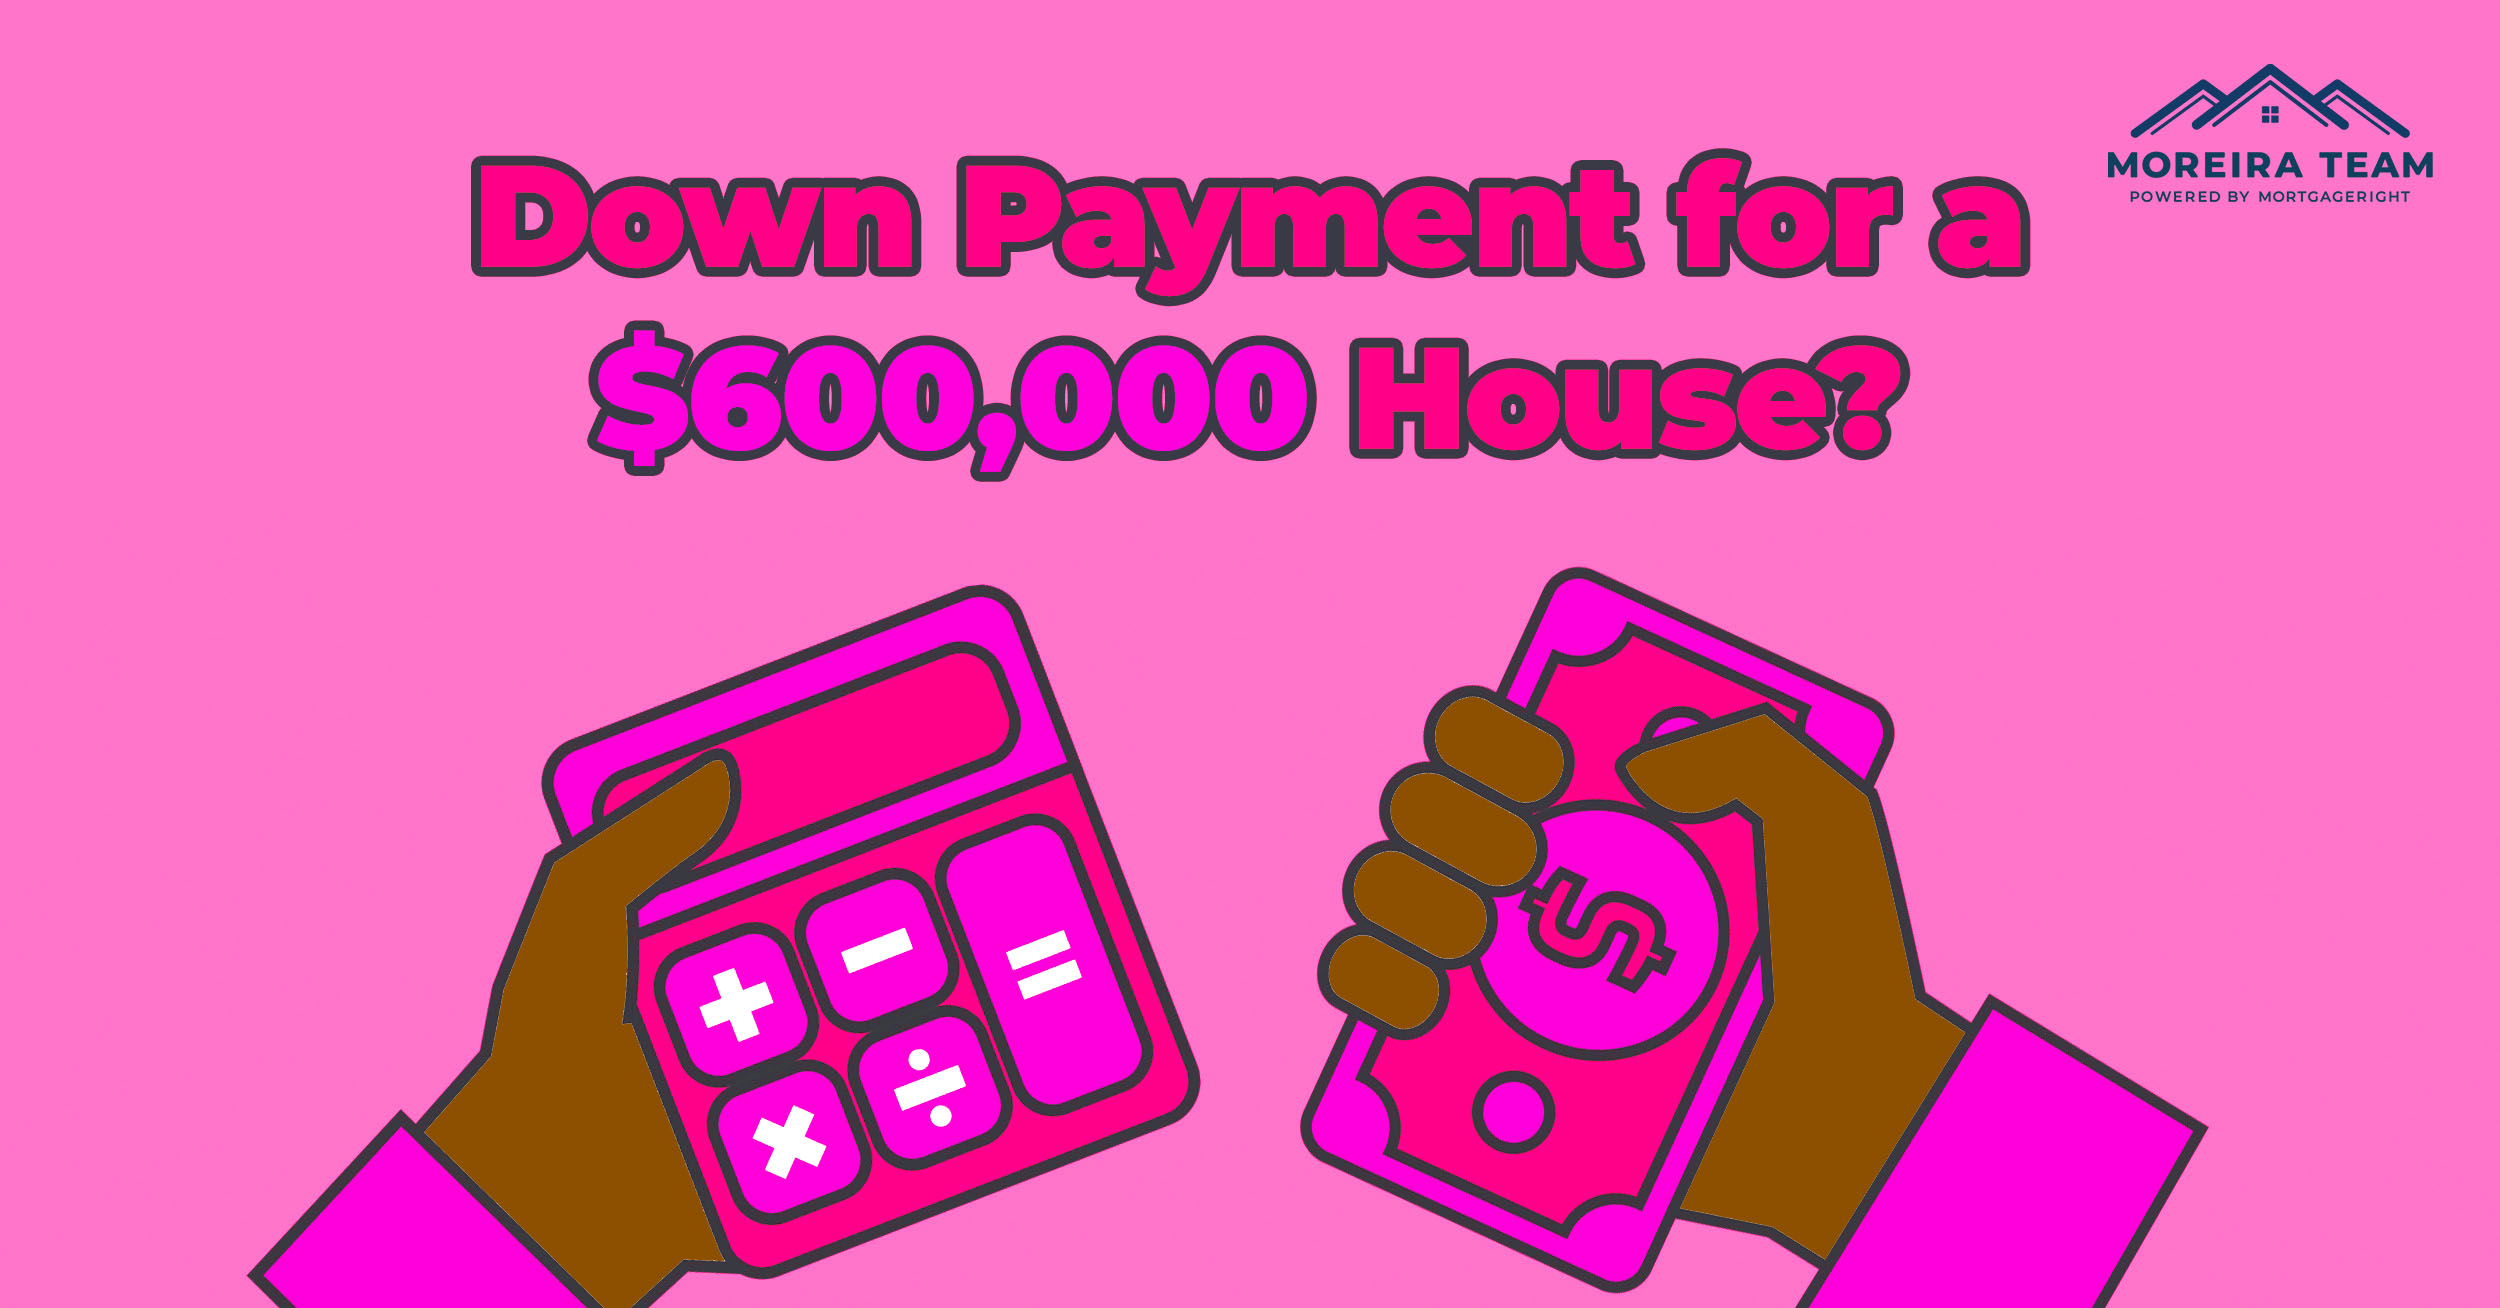 What is the Down Payment for a $600,000 Home?